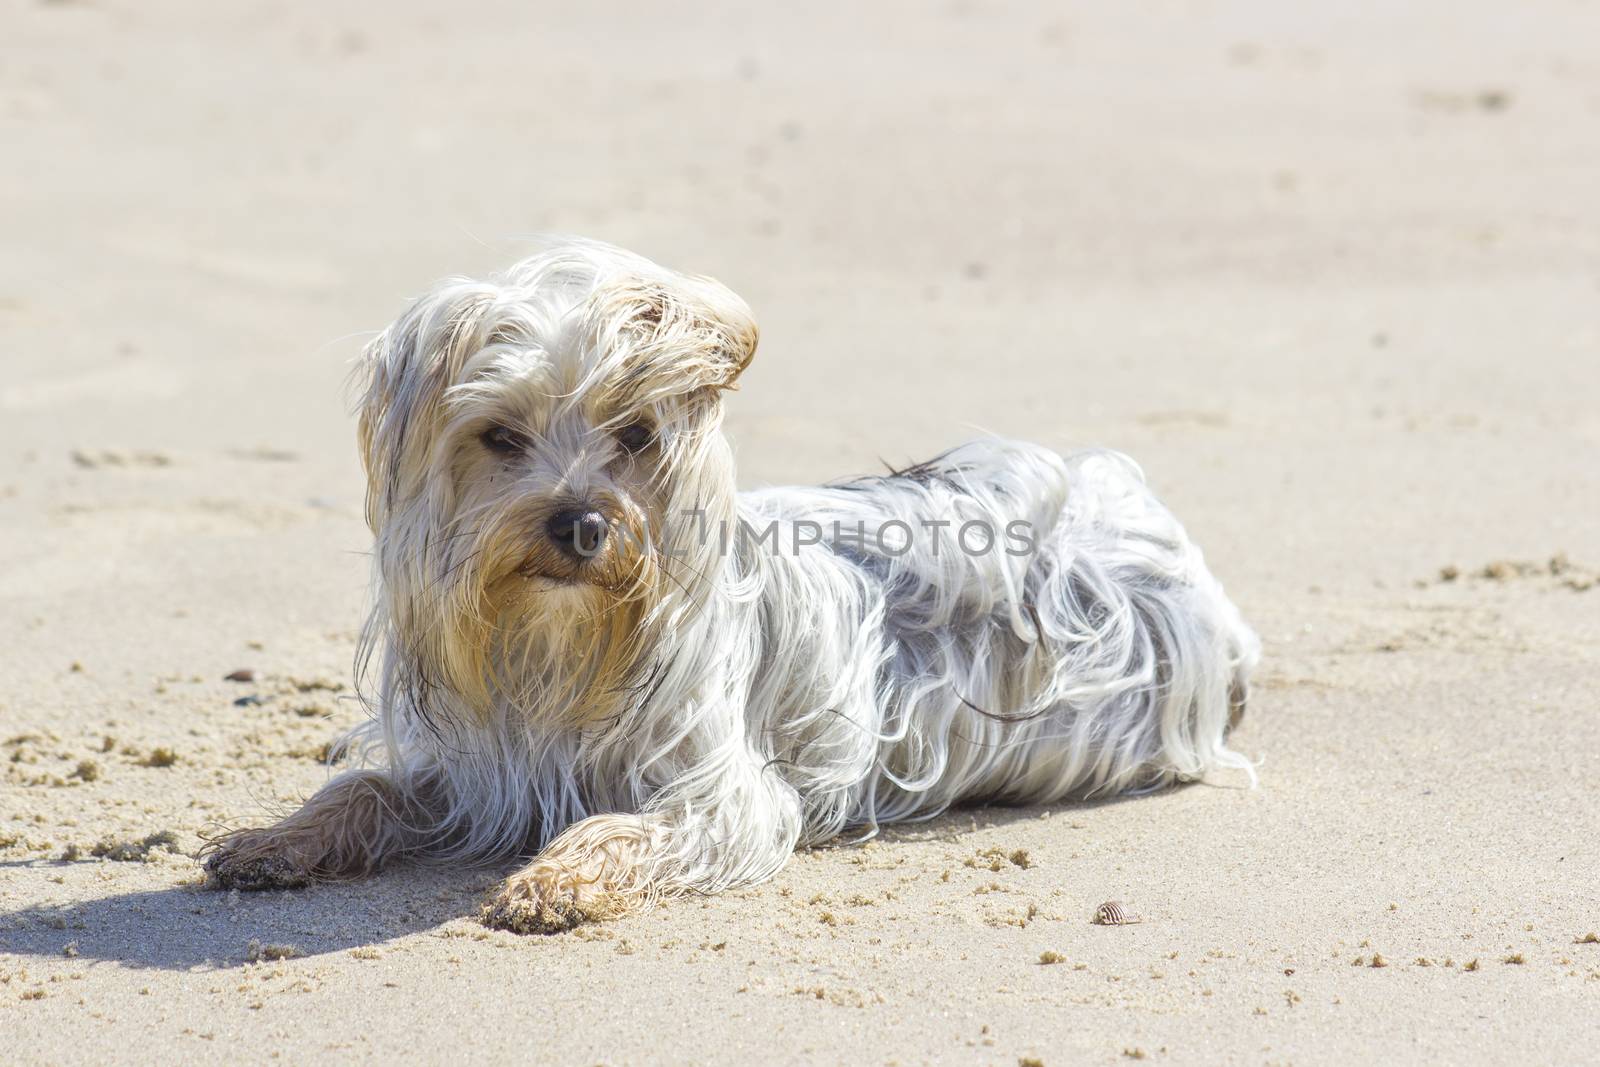 yorkshire terrier on the beach in windy day  by miradrozdowski